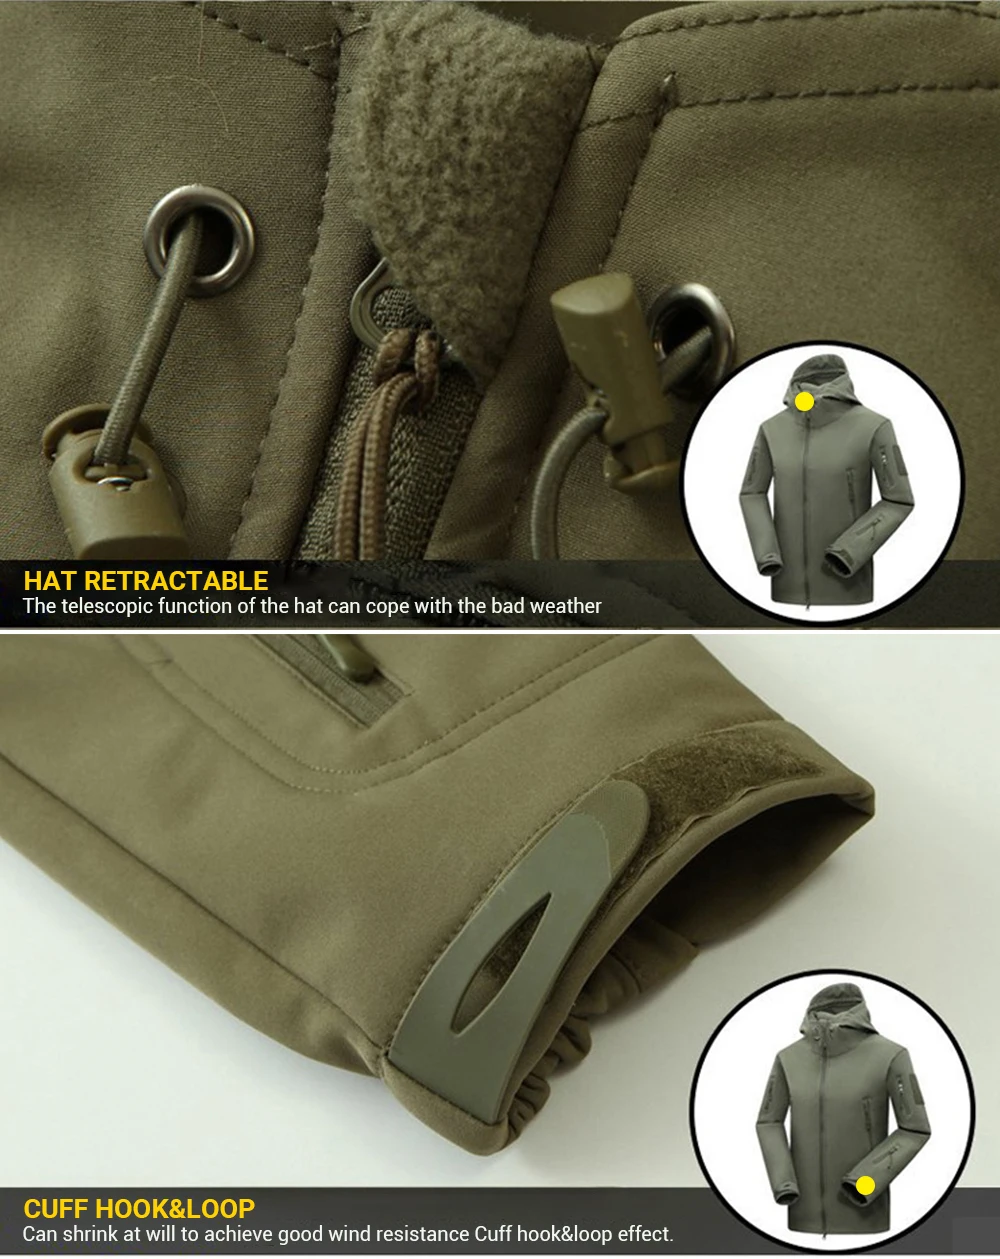 An ultra-thin Smart Heated Jacket with pocket temperature controls, featuring a hood and zipper.